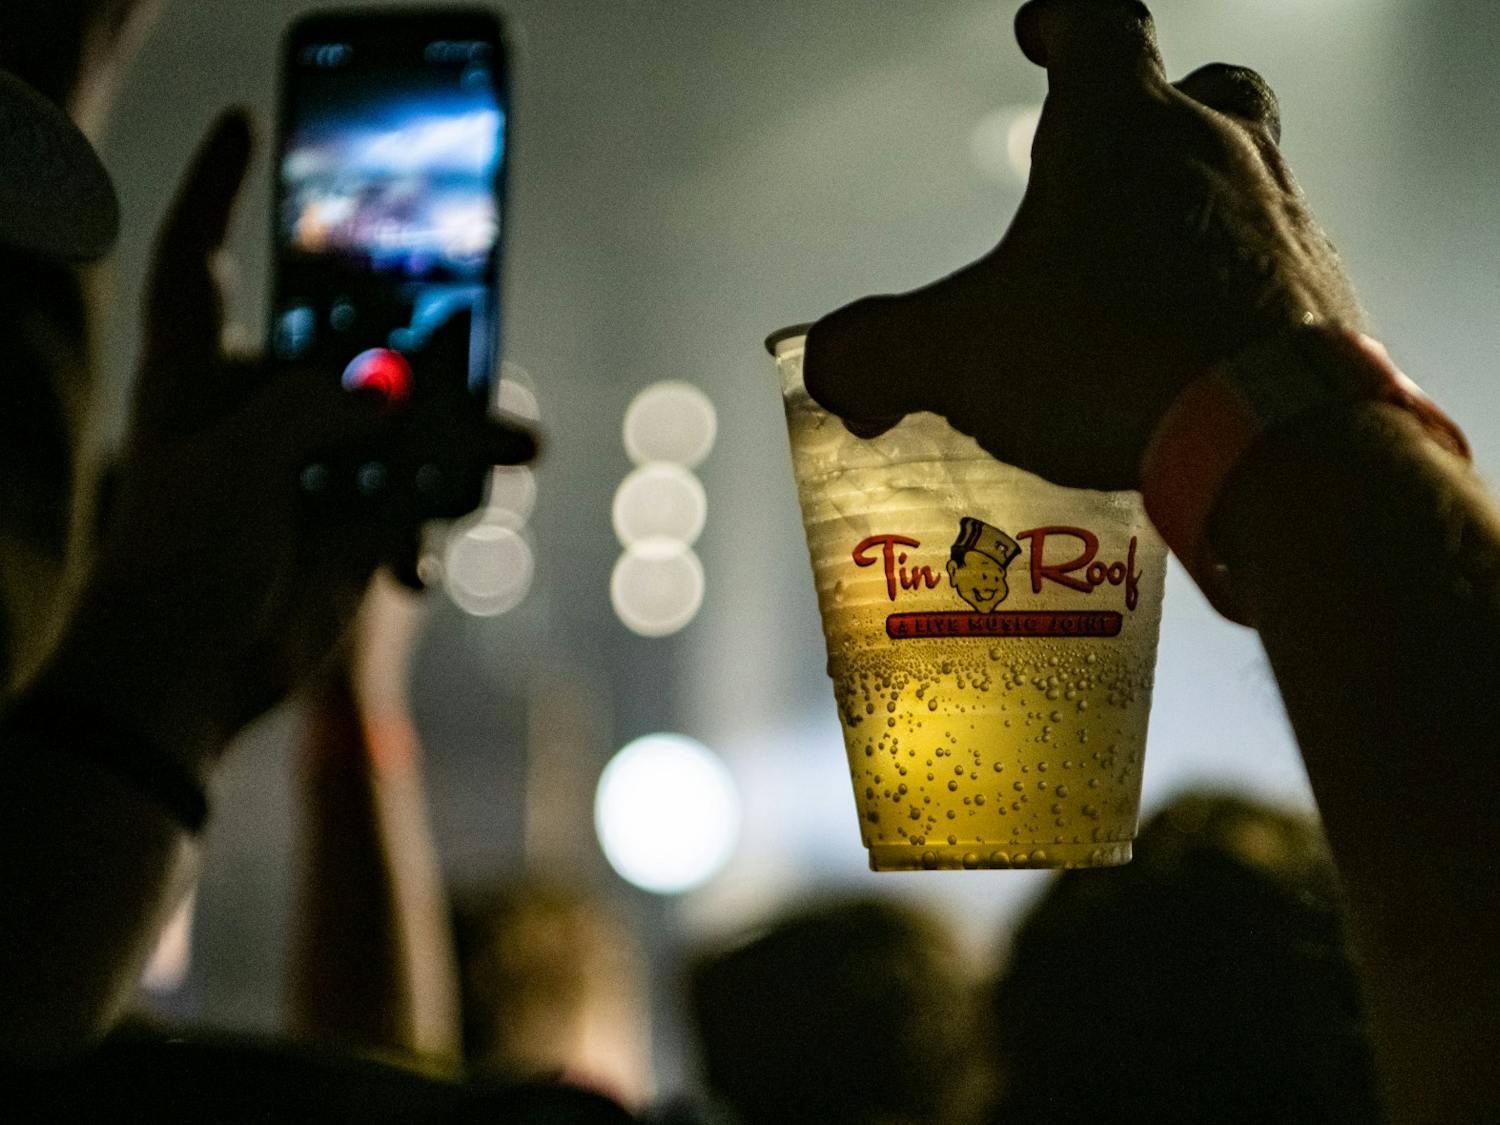 A fan holds a cup of beer and records a video during the Matt and Kim concert Nov. 17, 2019 at The Senate. The Senate offers a full bar and allows food purchased at Tin Roof next door to be brought over to the concert venue.